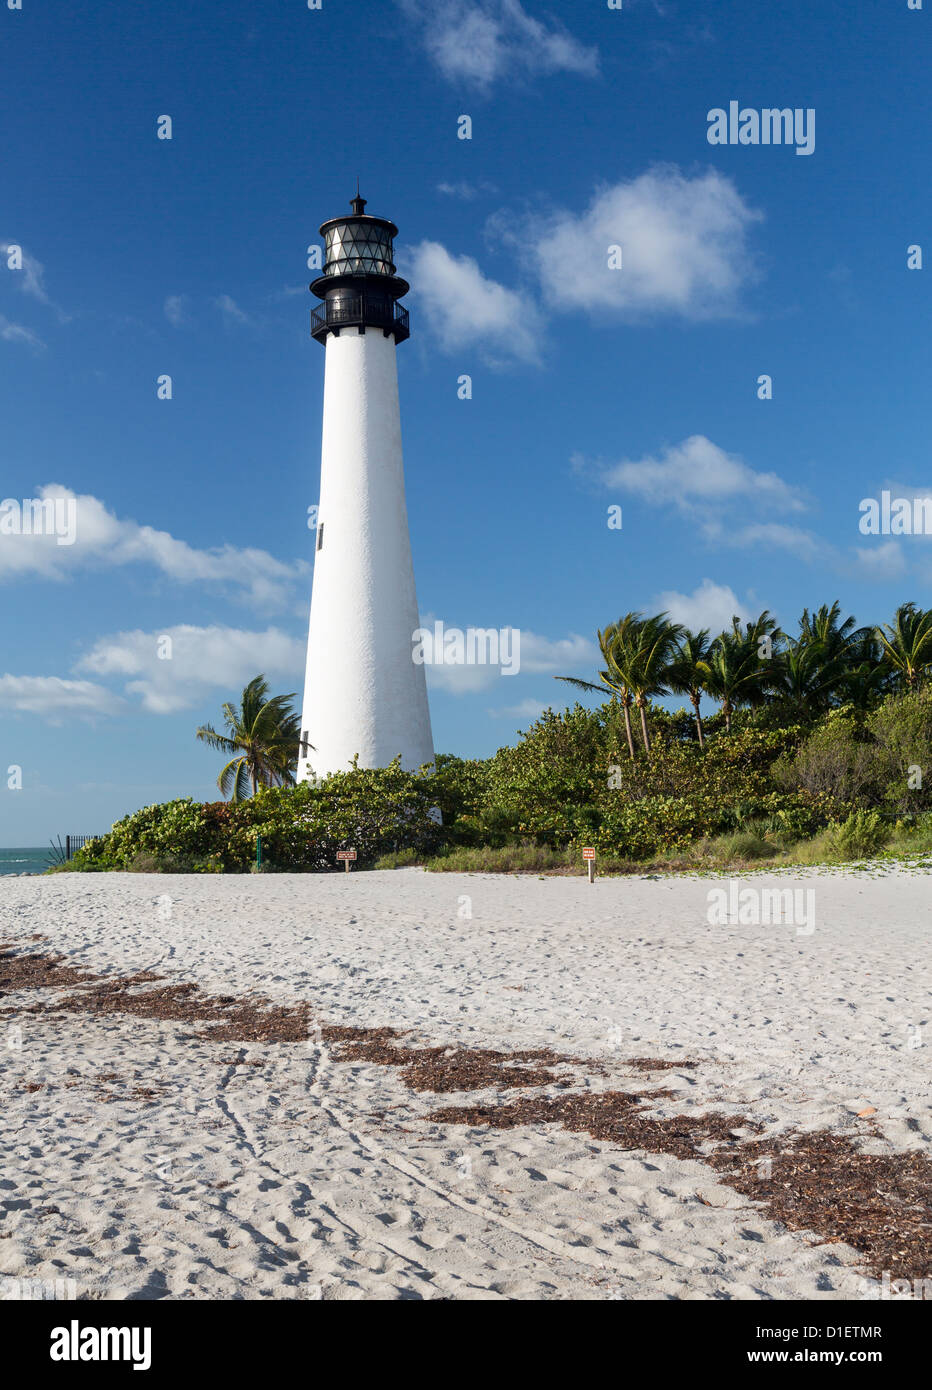 Cape Florida Lighthouse and Lantern in Bill Baggs State Park in Key Biscayne, Florida, USA Stock Photo